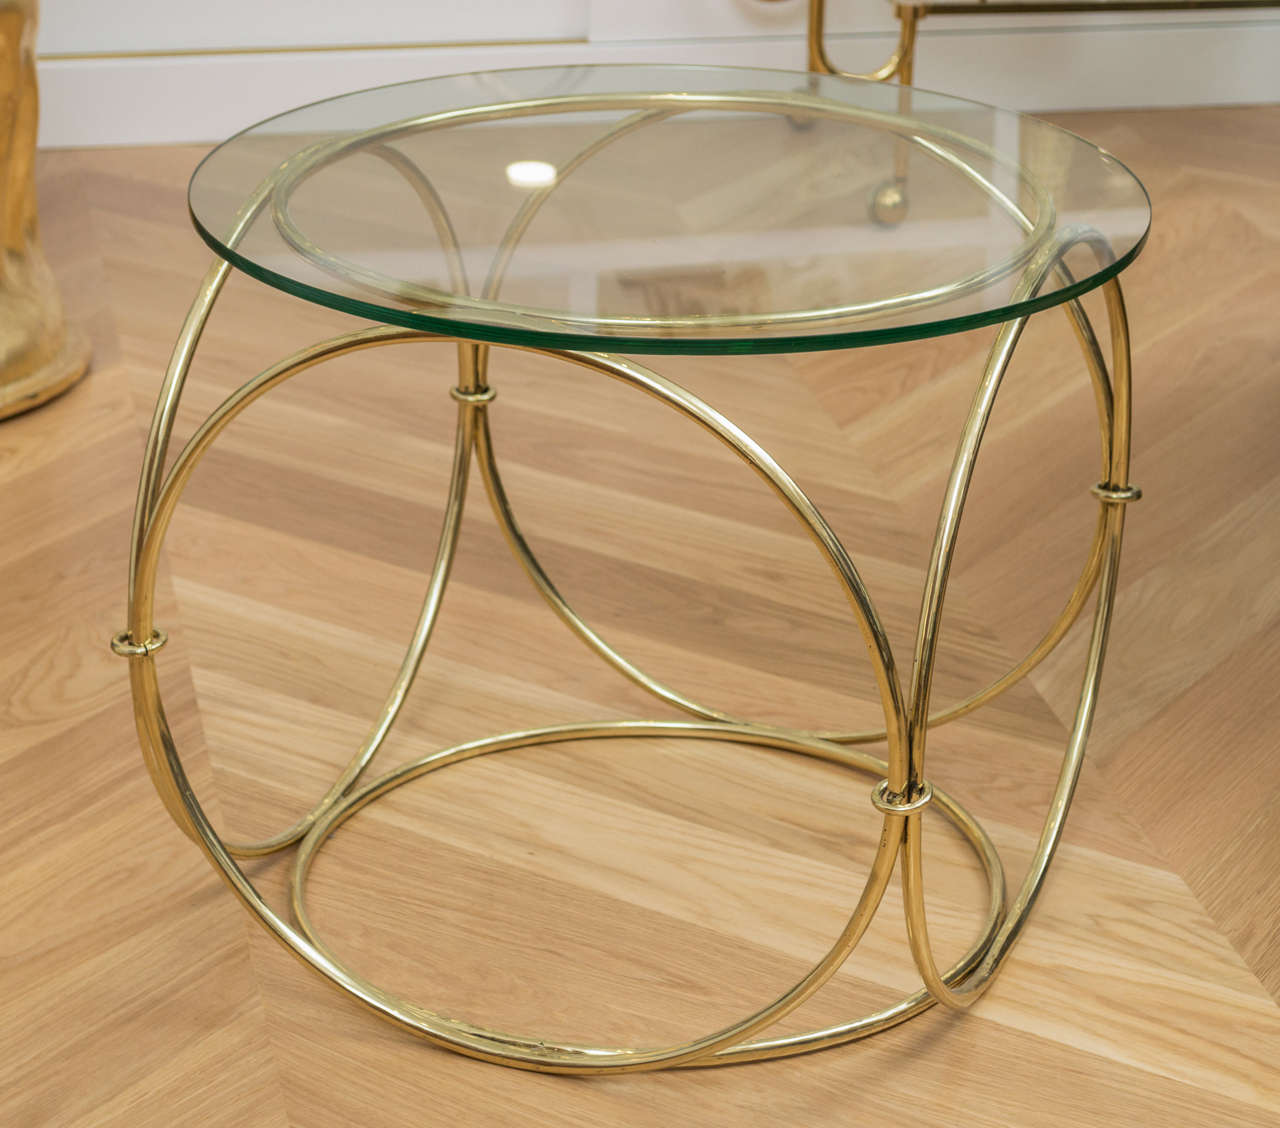 Beautiful polished brass occasional table with a glass top.